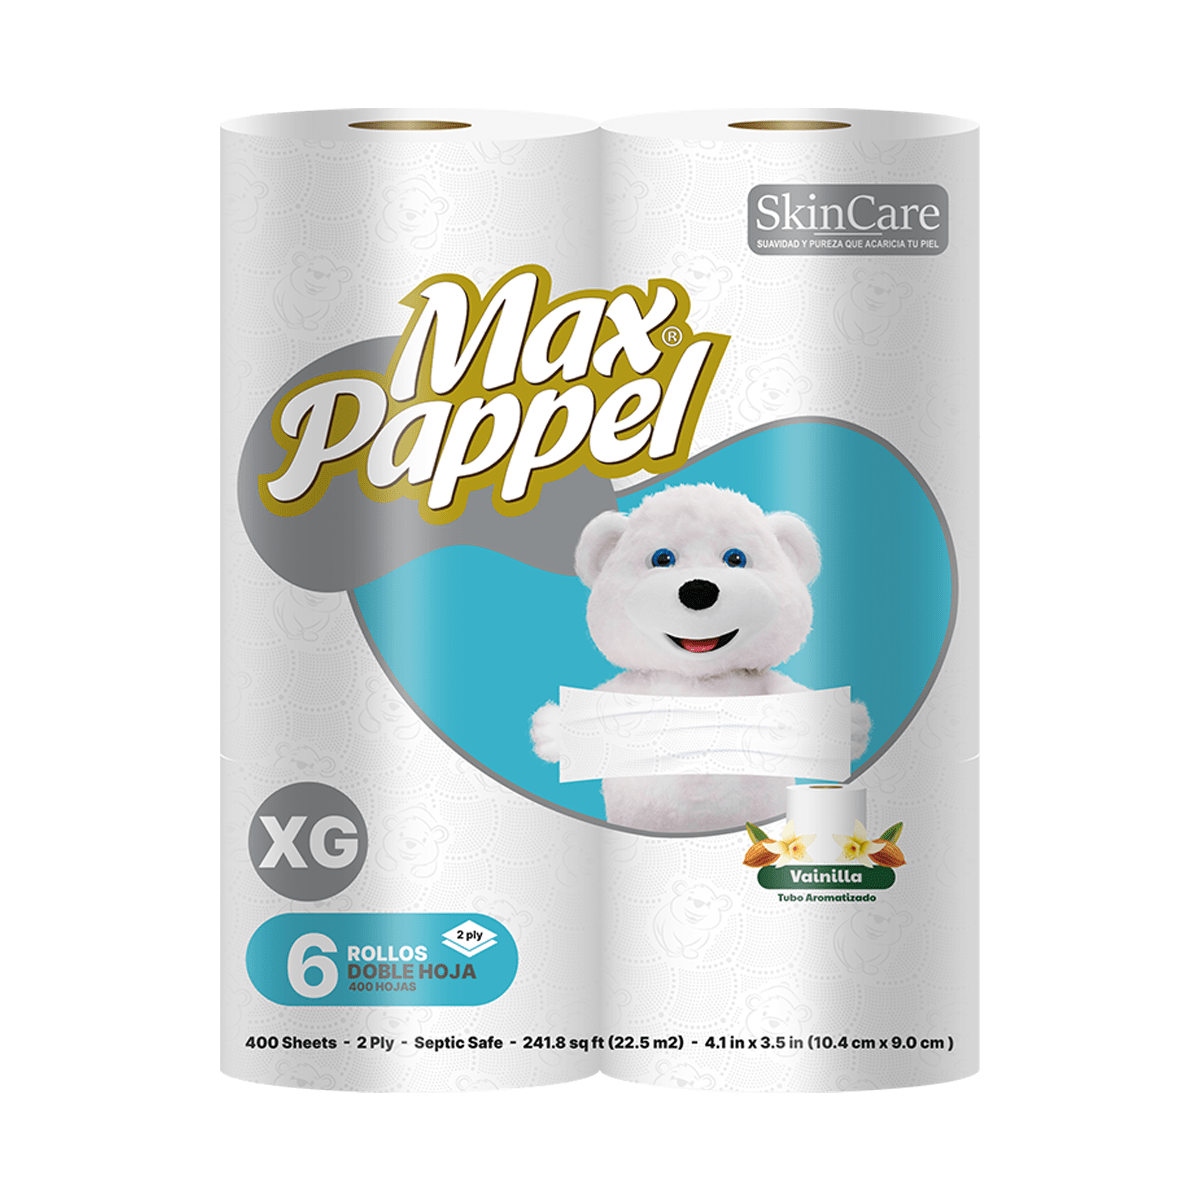 Two Ply Skin Care <br>8 Packs x 6 Rolls